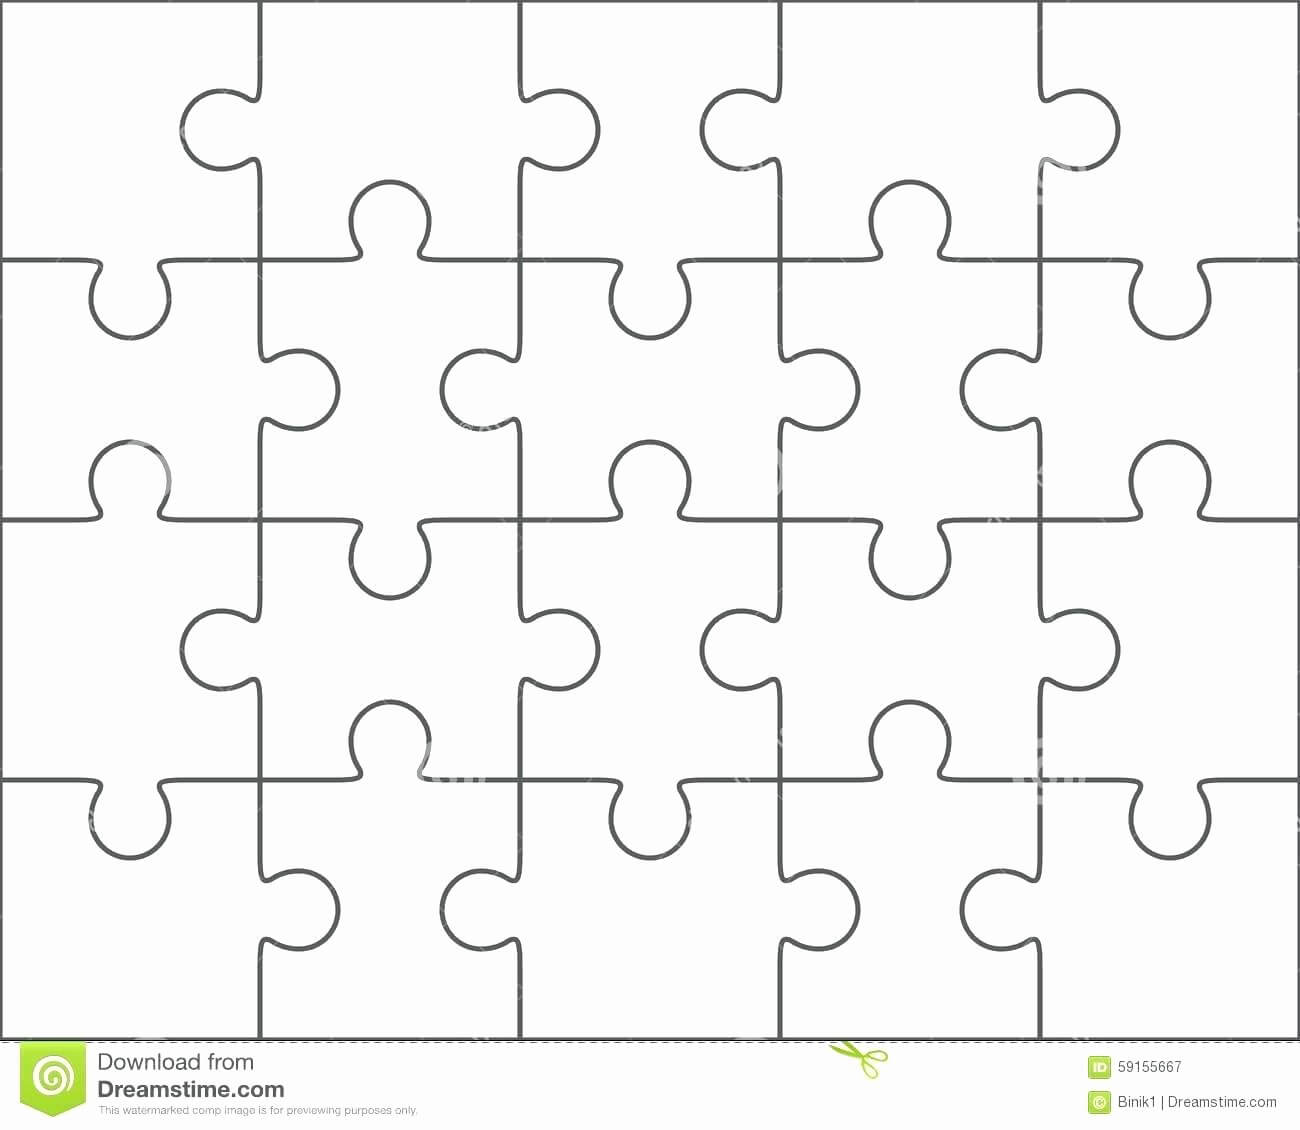 030 Puzzle Pieces Template For Word Best Of Piece Intended Inside Jigsaw Puzzle Template For Word